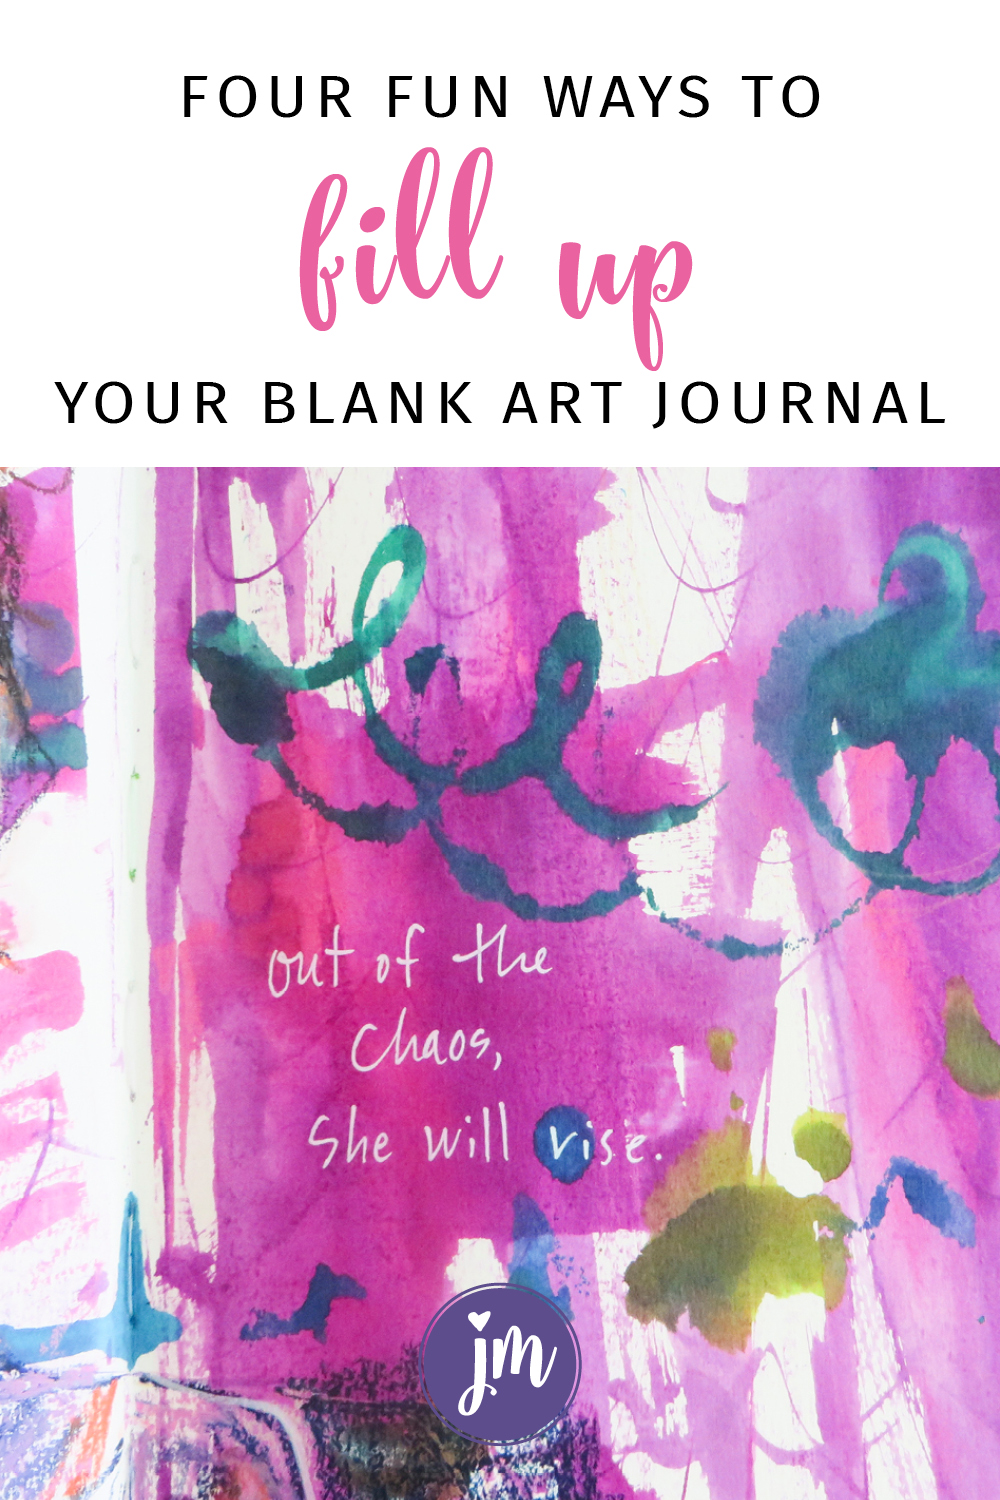 I need to get out my art supplies and try these! Looks like so much fun to art journal. :)